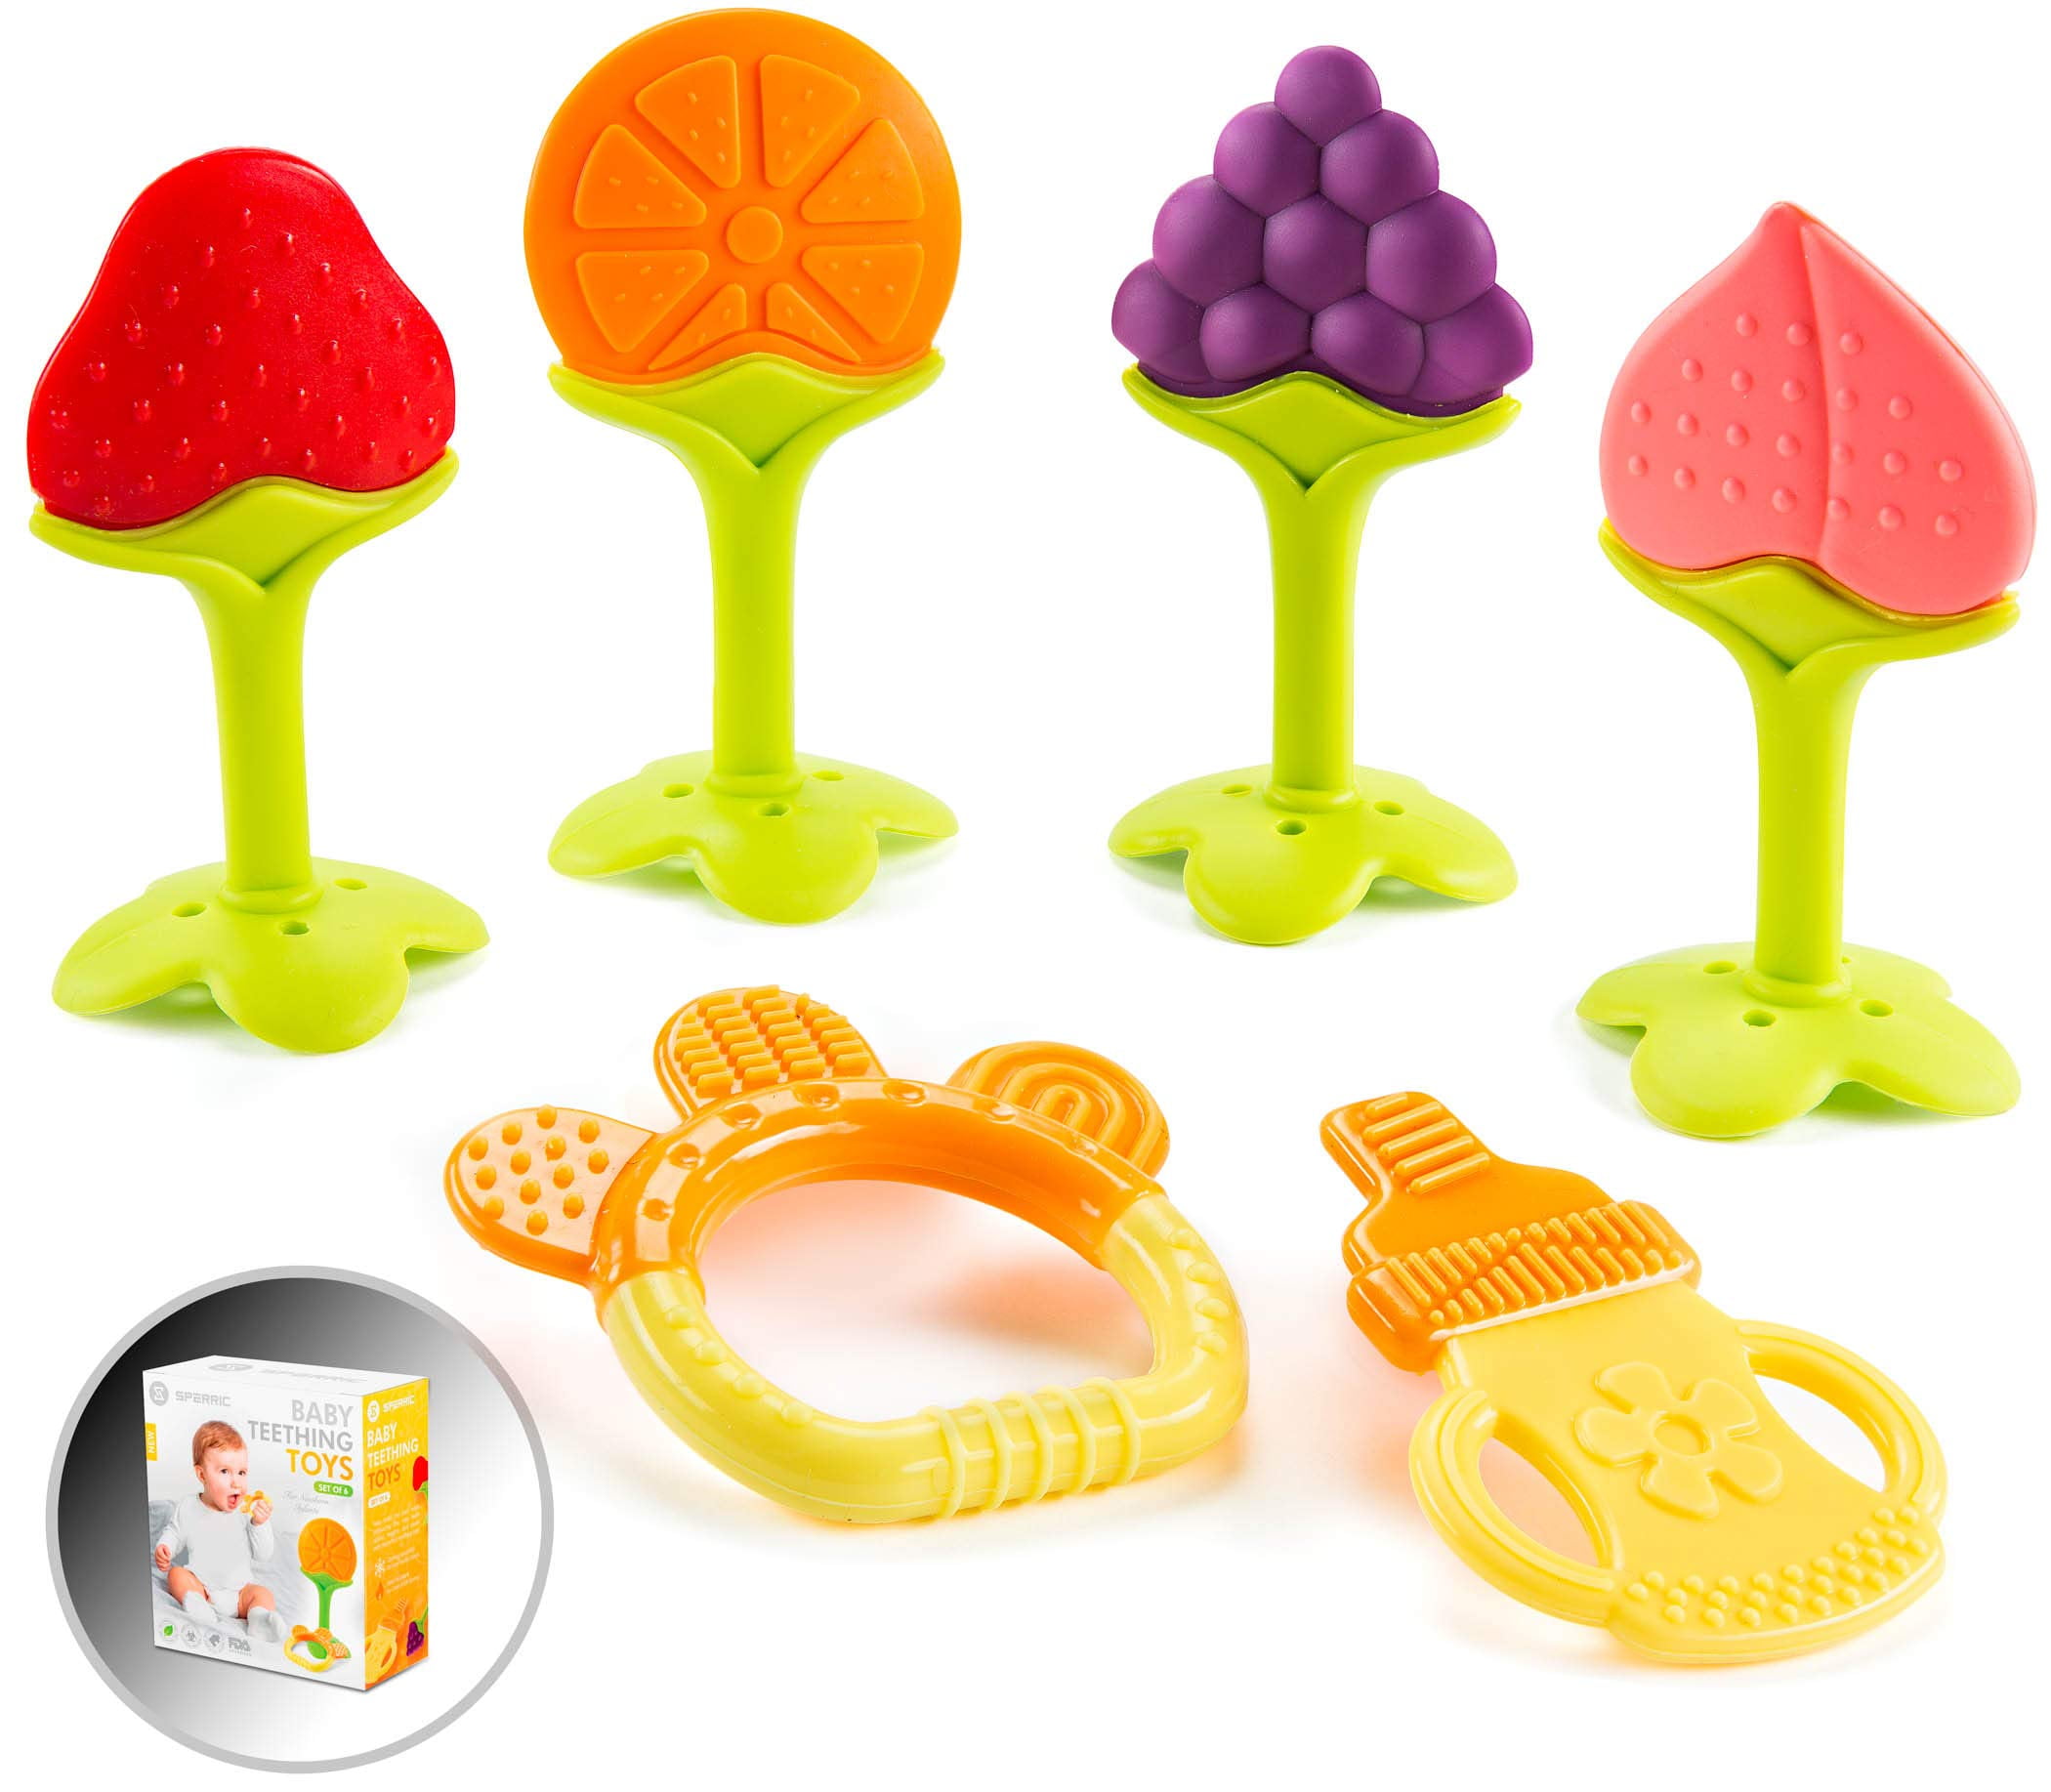 MAM baby Bite n Play Baby Teether and Toy BPA FREE 1 PACK 